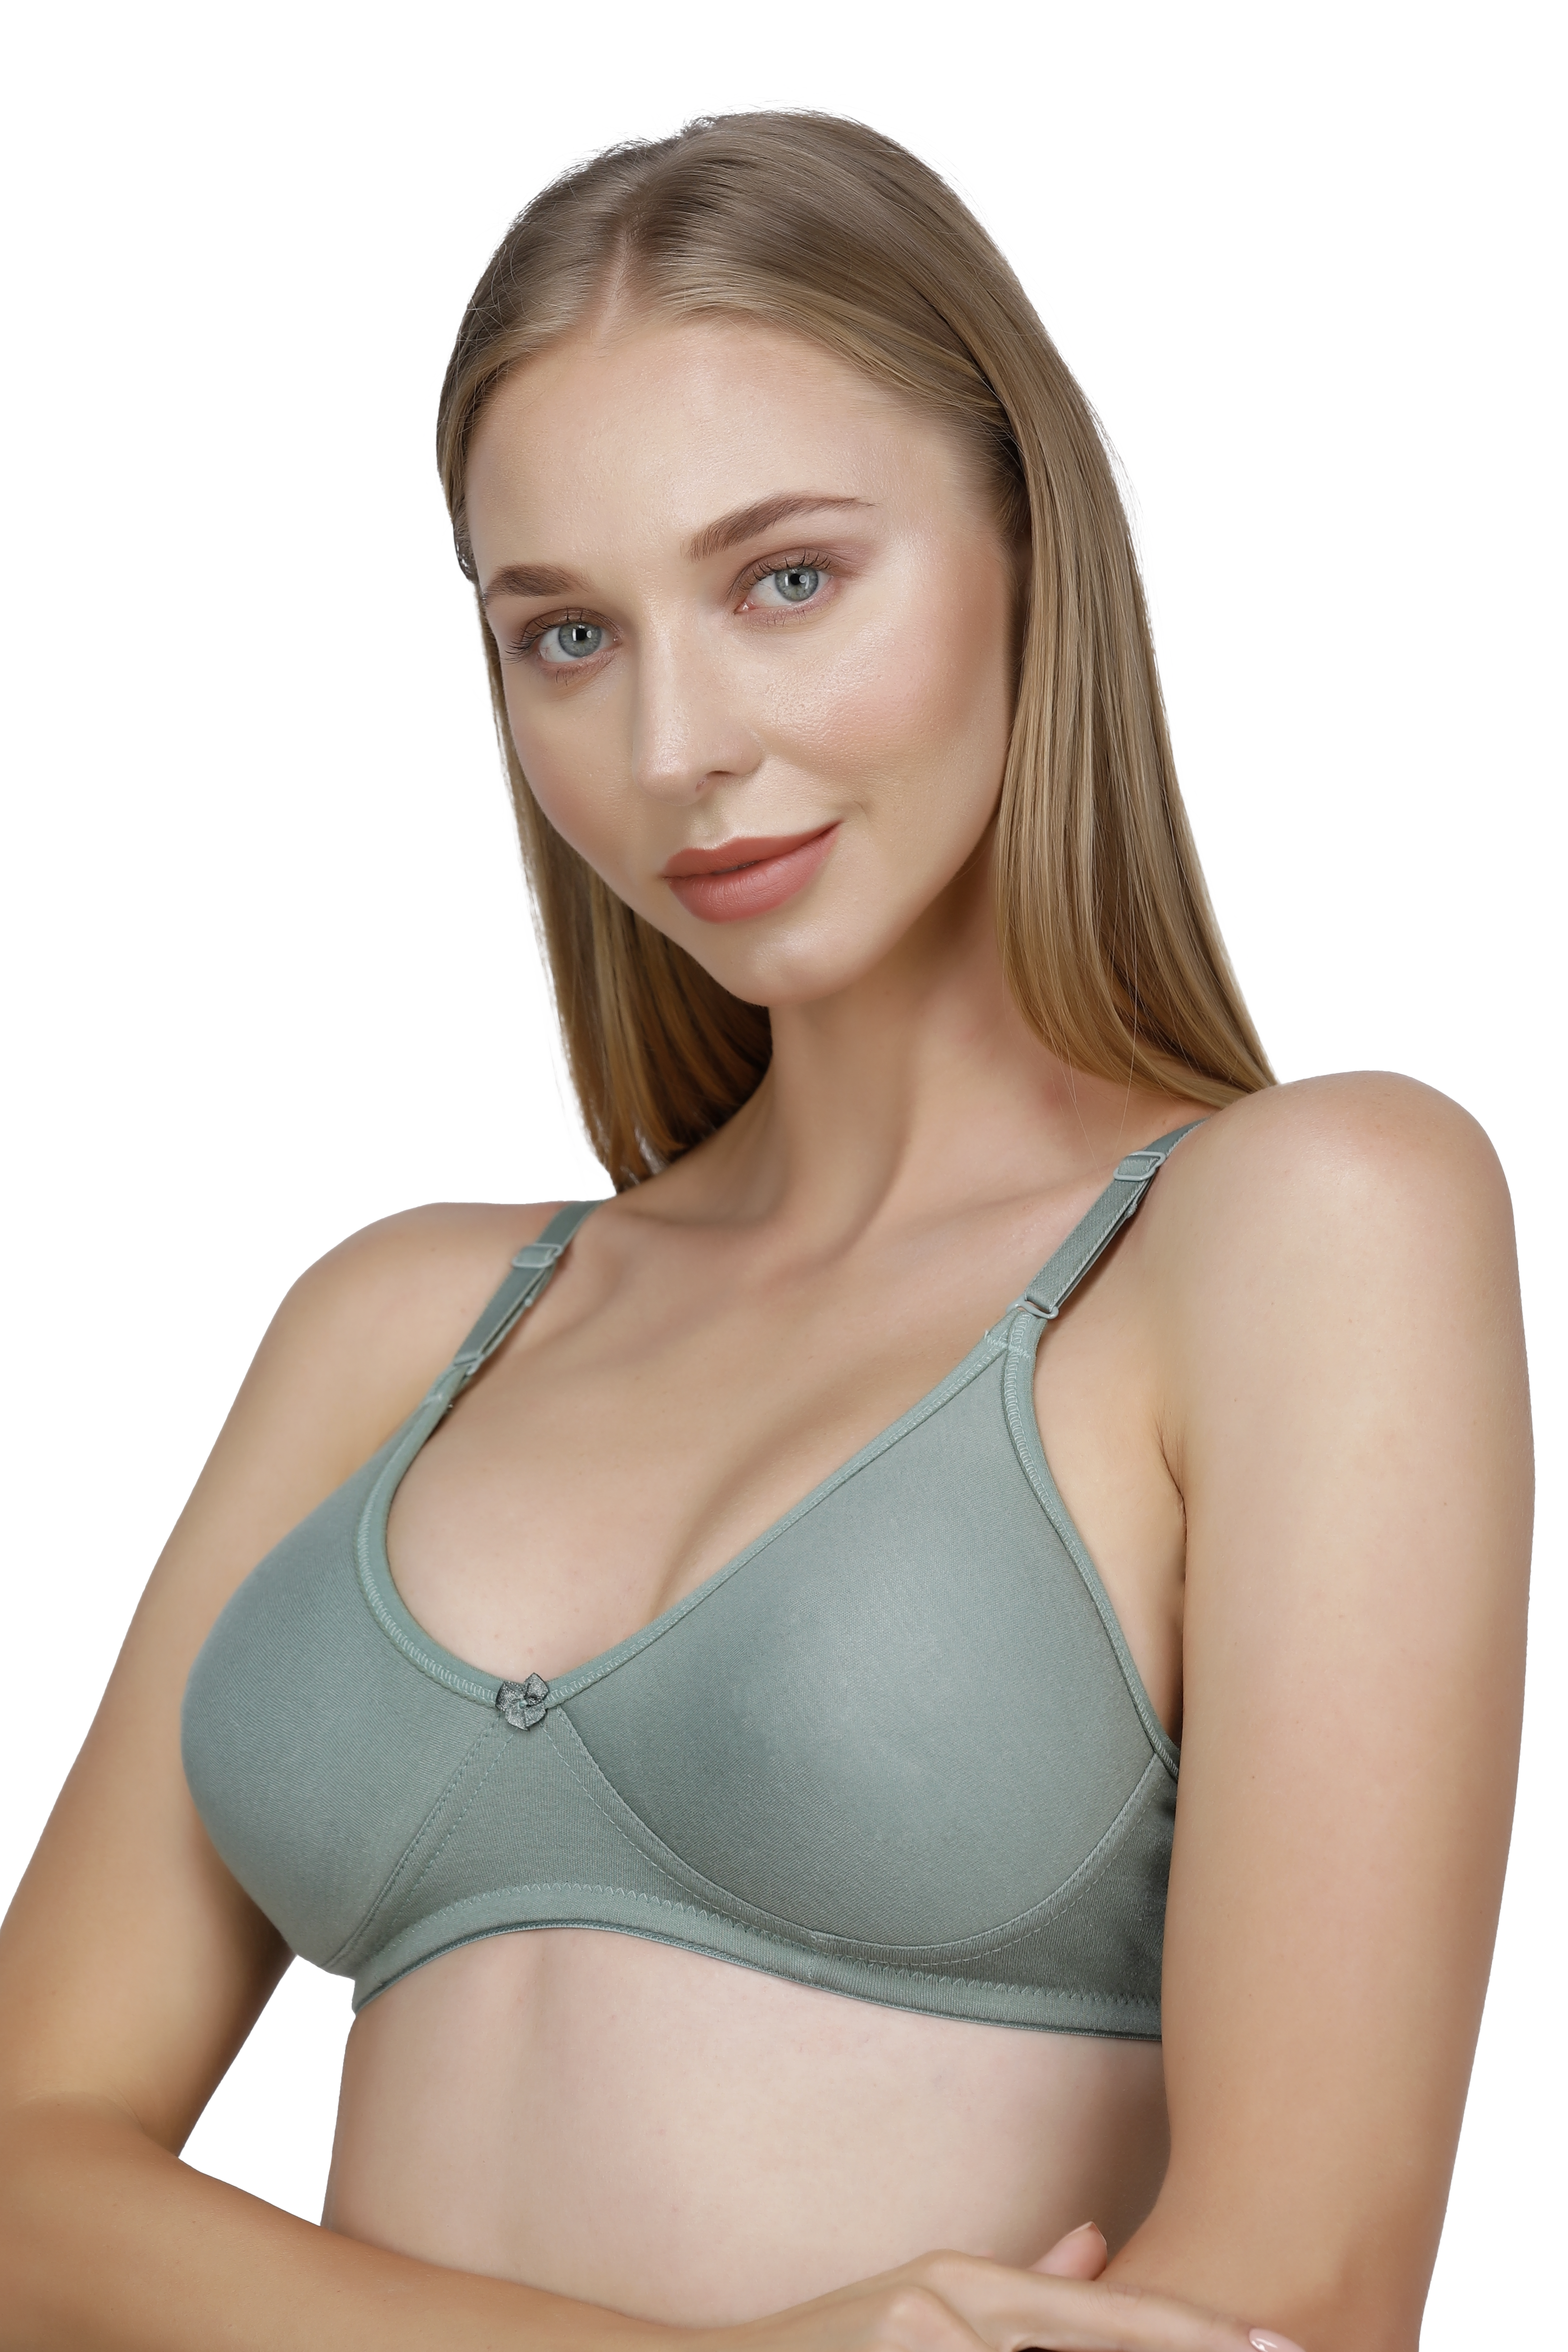 Zivira Xtreme Sports Bra for HIGH Impact Activities with Removable Pads  -Gym,Zumba,Yoga,Running,Cycling